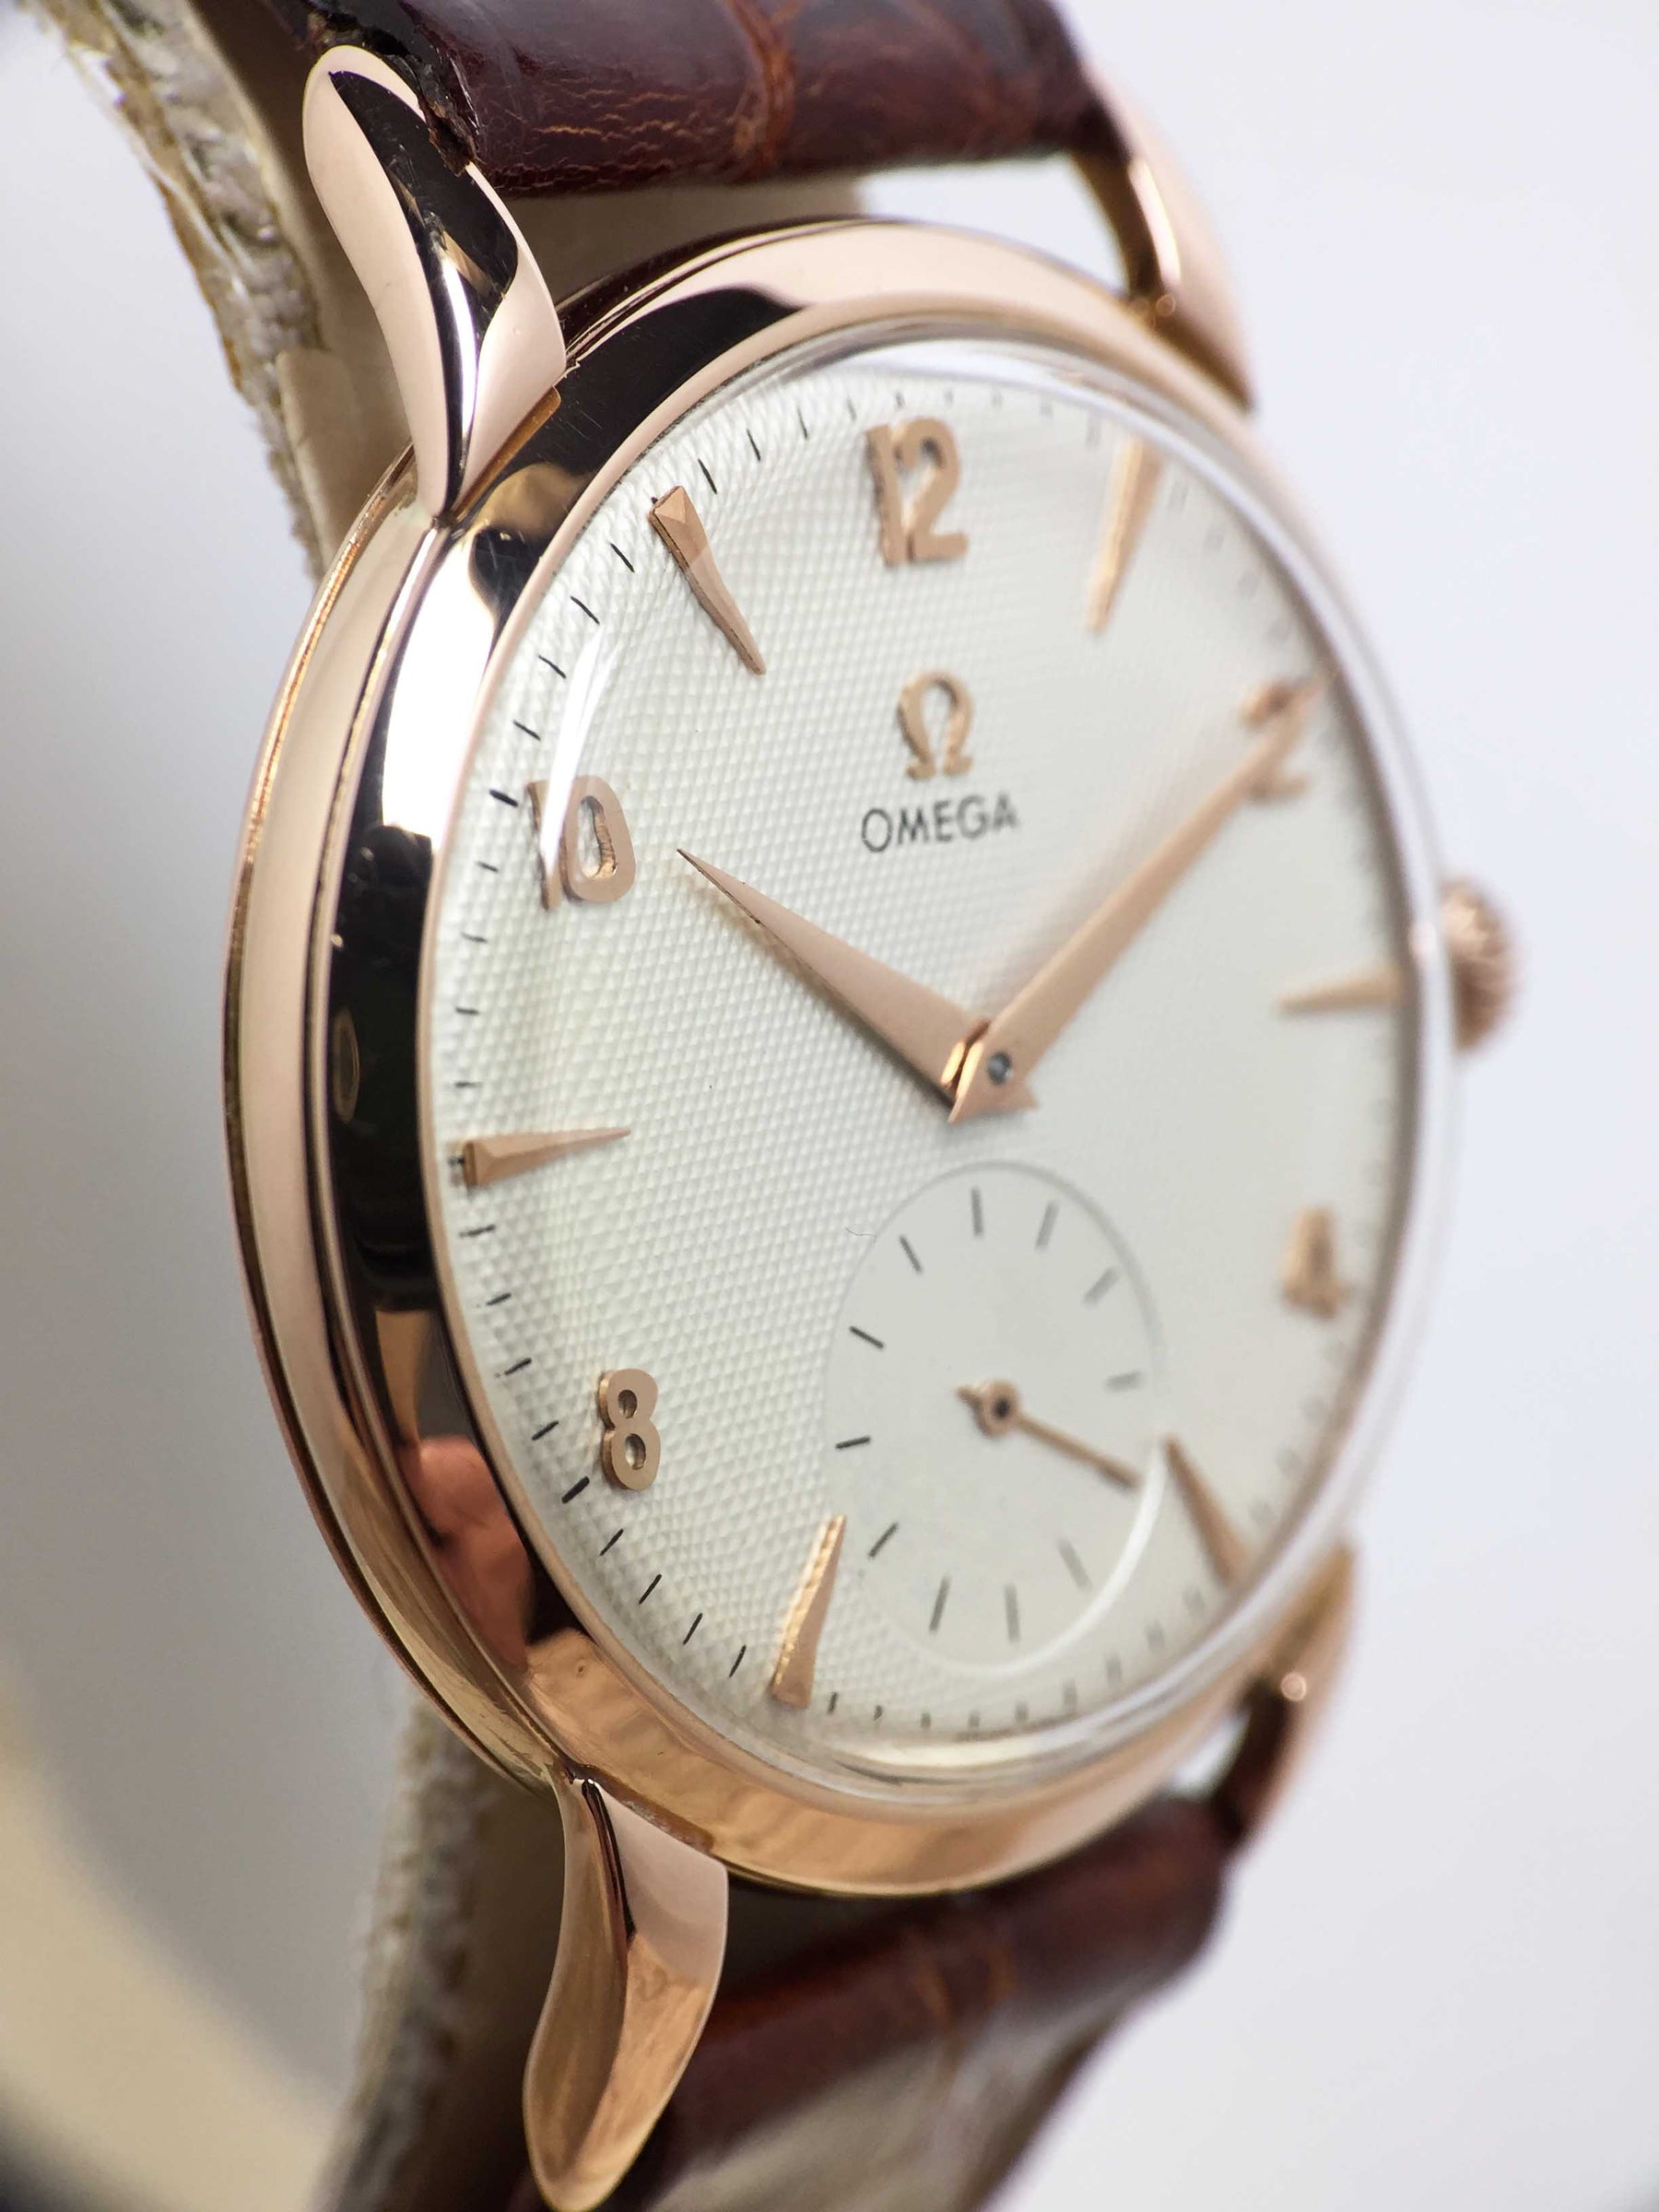 1956 Omega Dress Watch Pink Gold Honeycomb Dial Ref. 2685